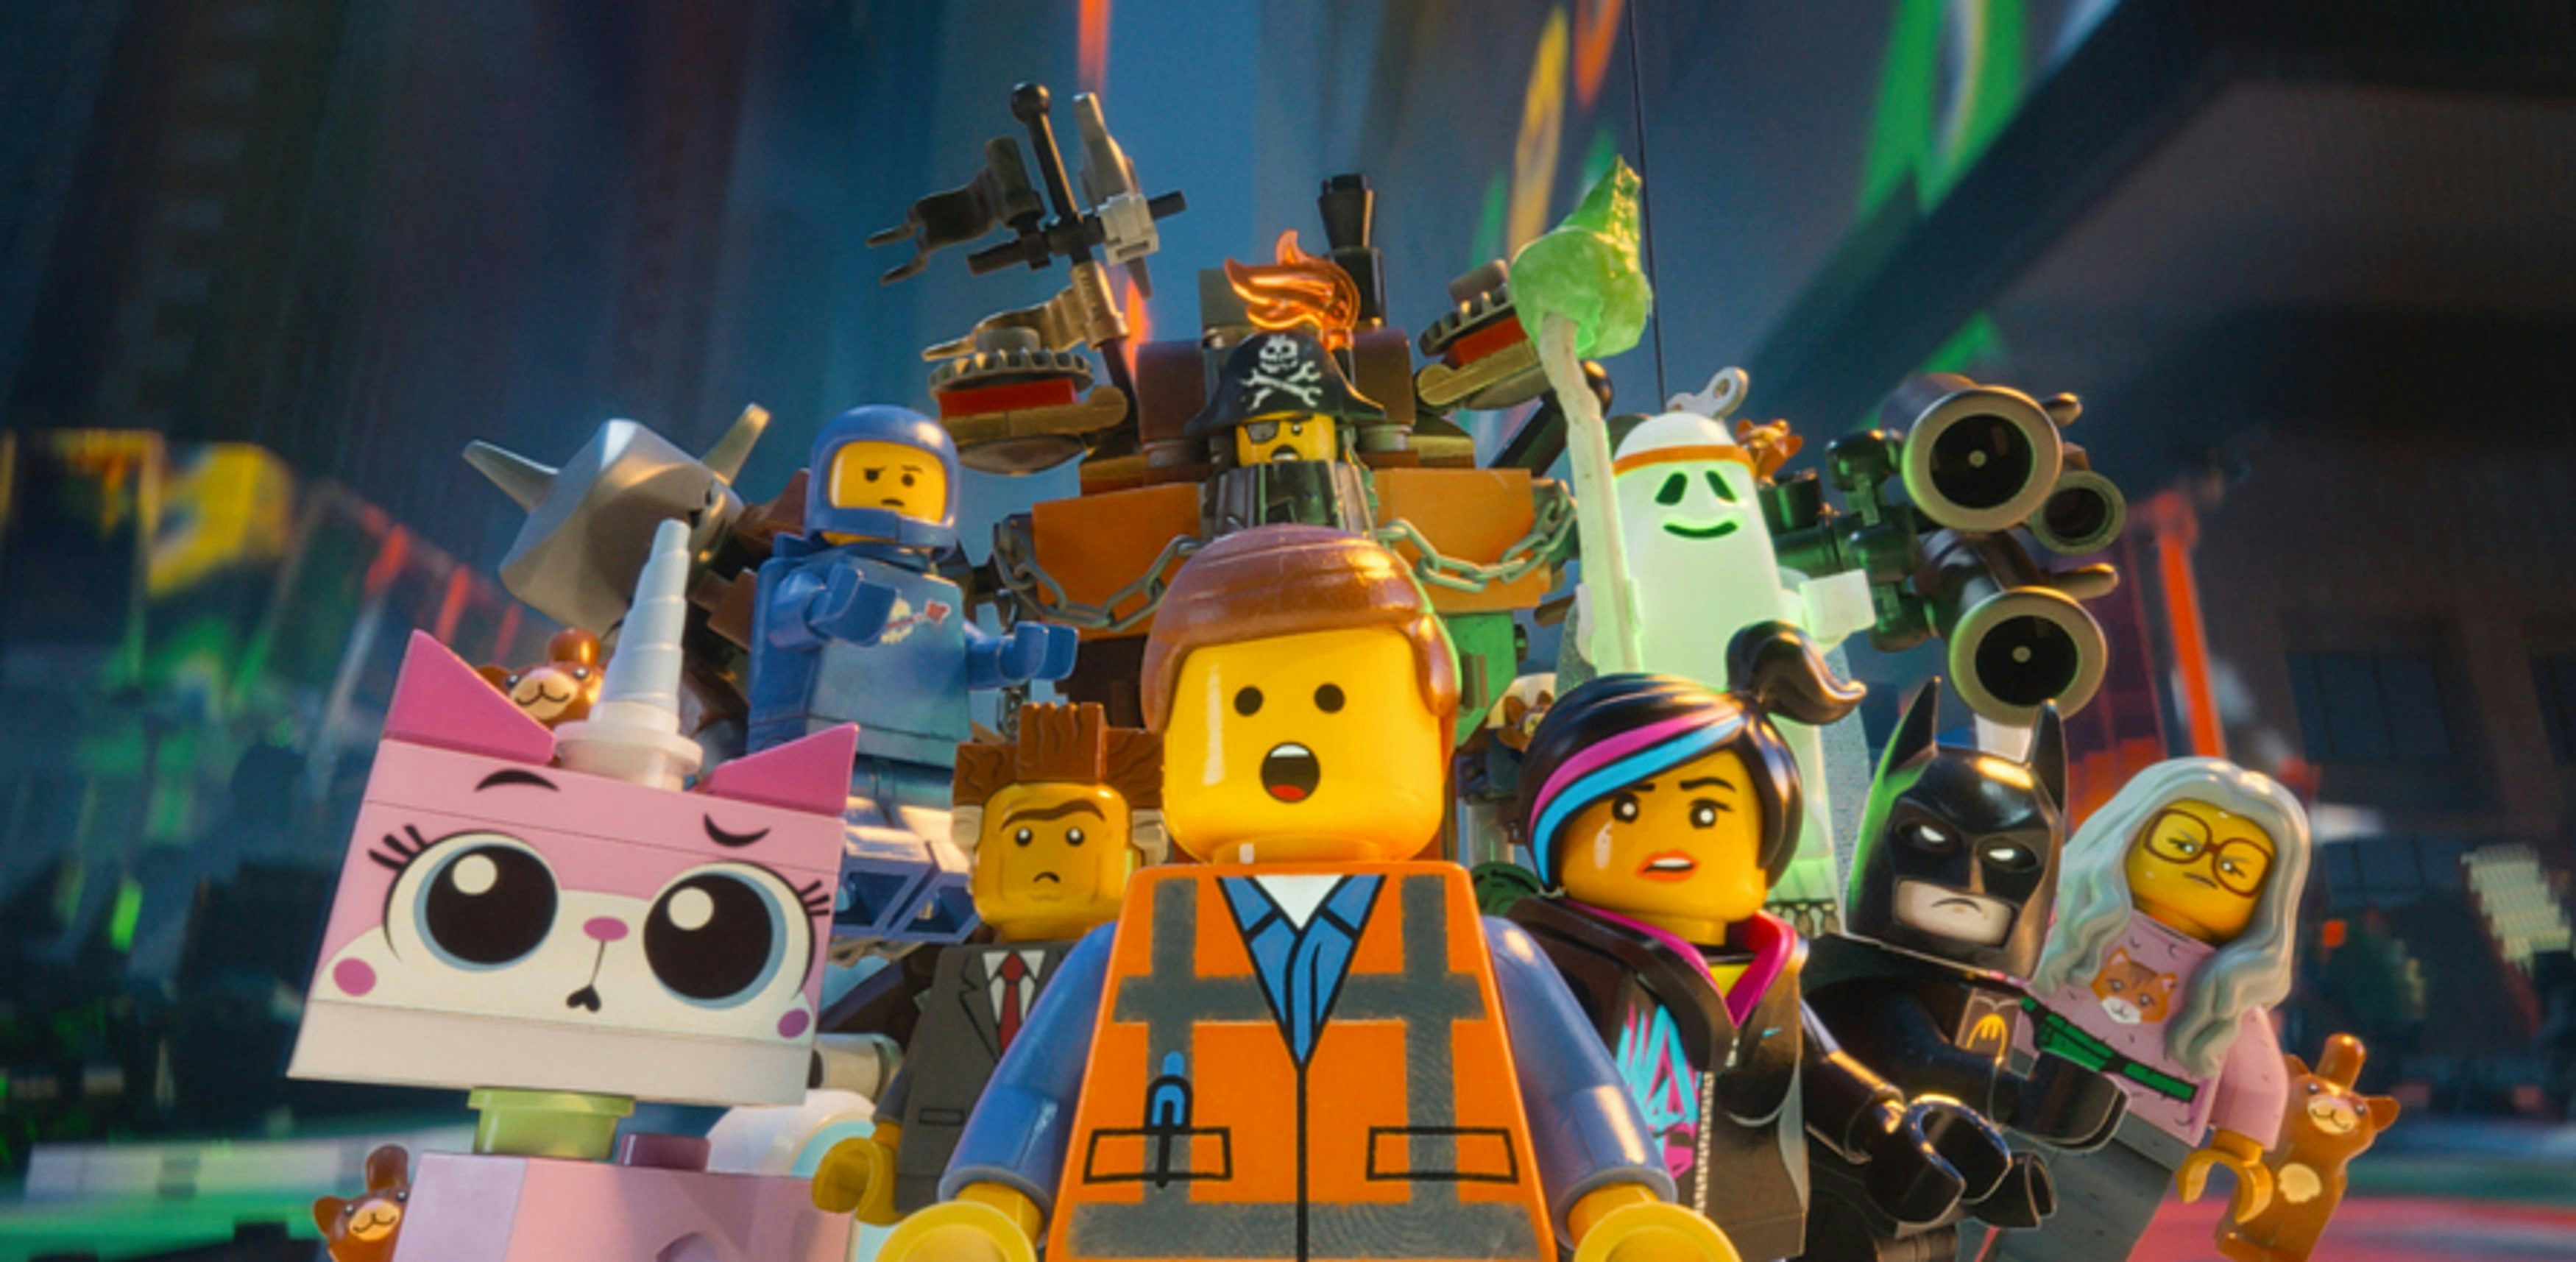 Assorted LEGO characters from 'The LEGO Movie' featuring Emmet, Wyldstyle, Batman, and others, in action, with a futuristic city background.